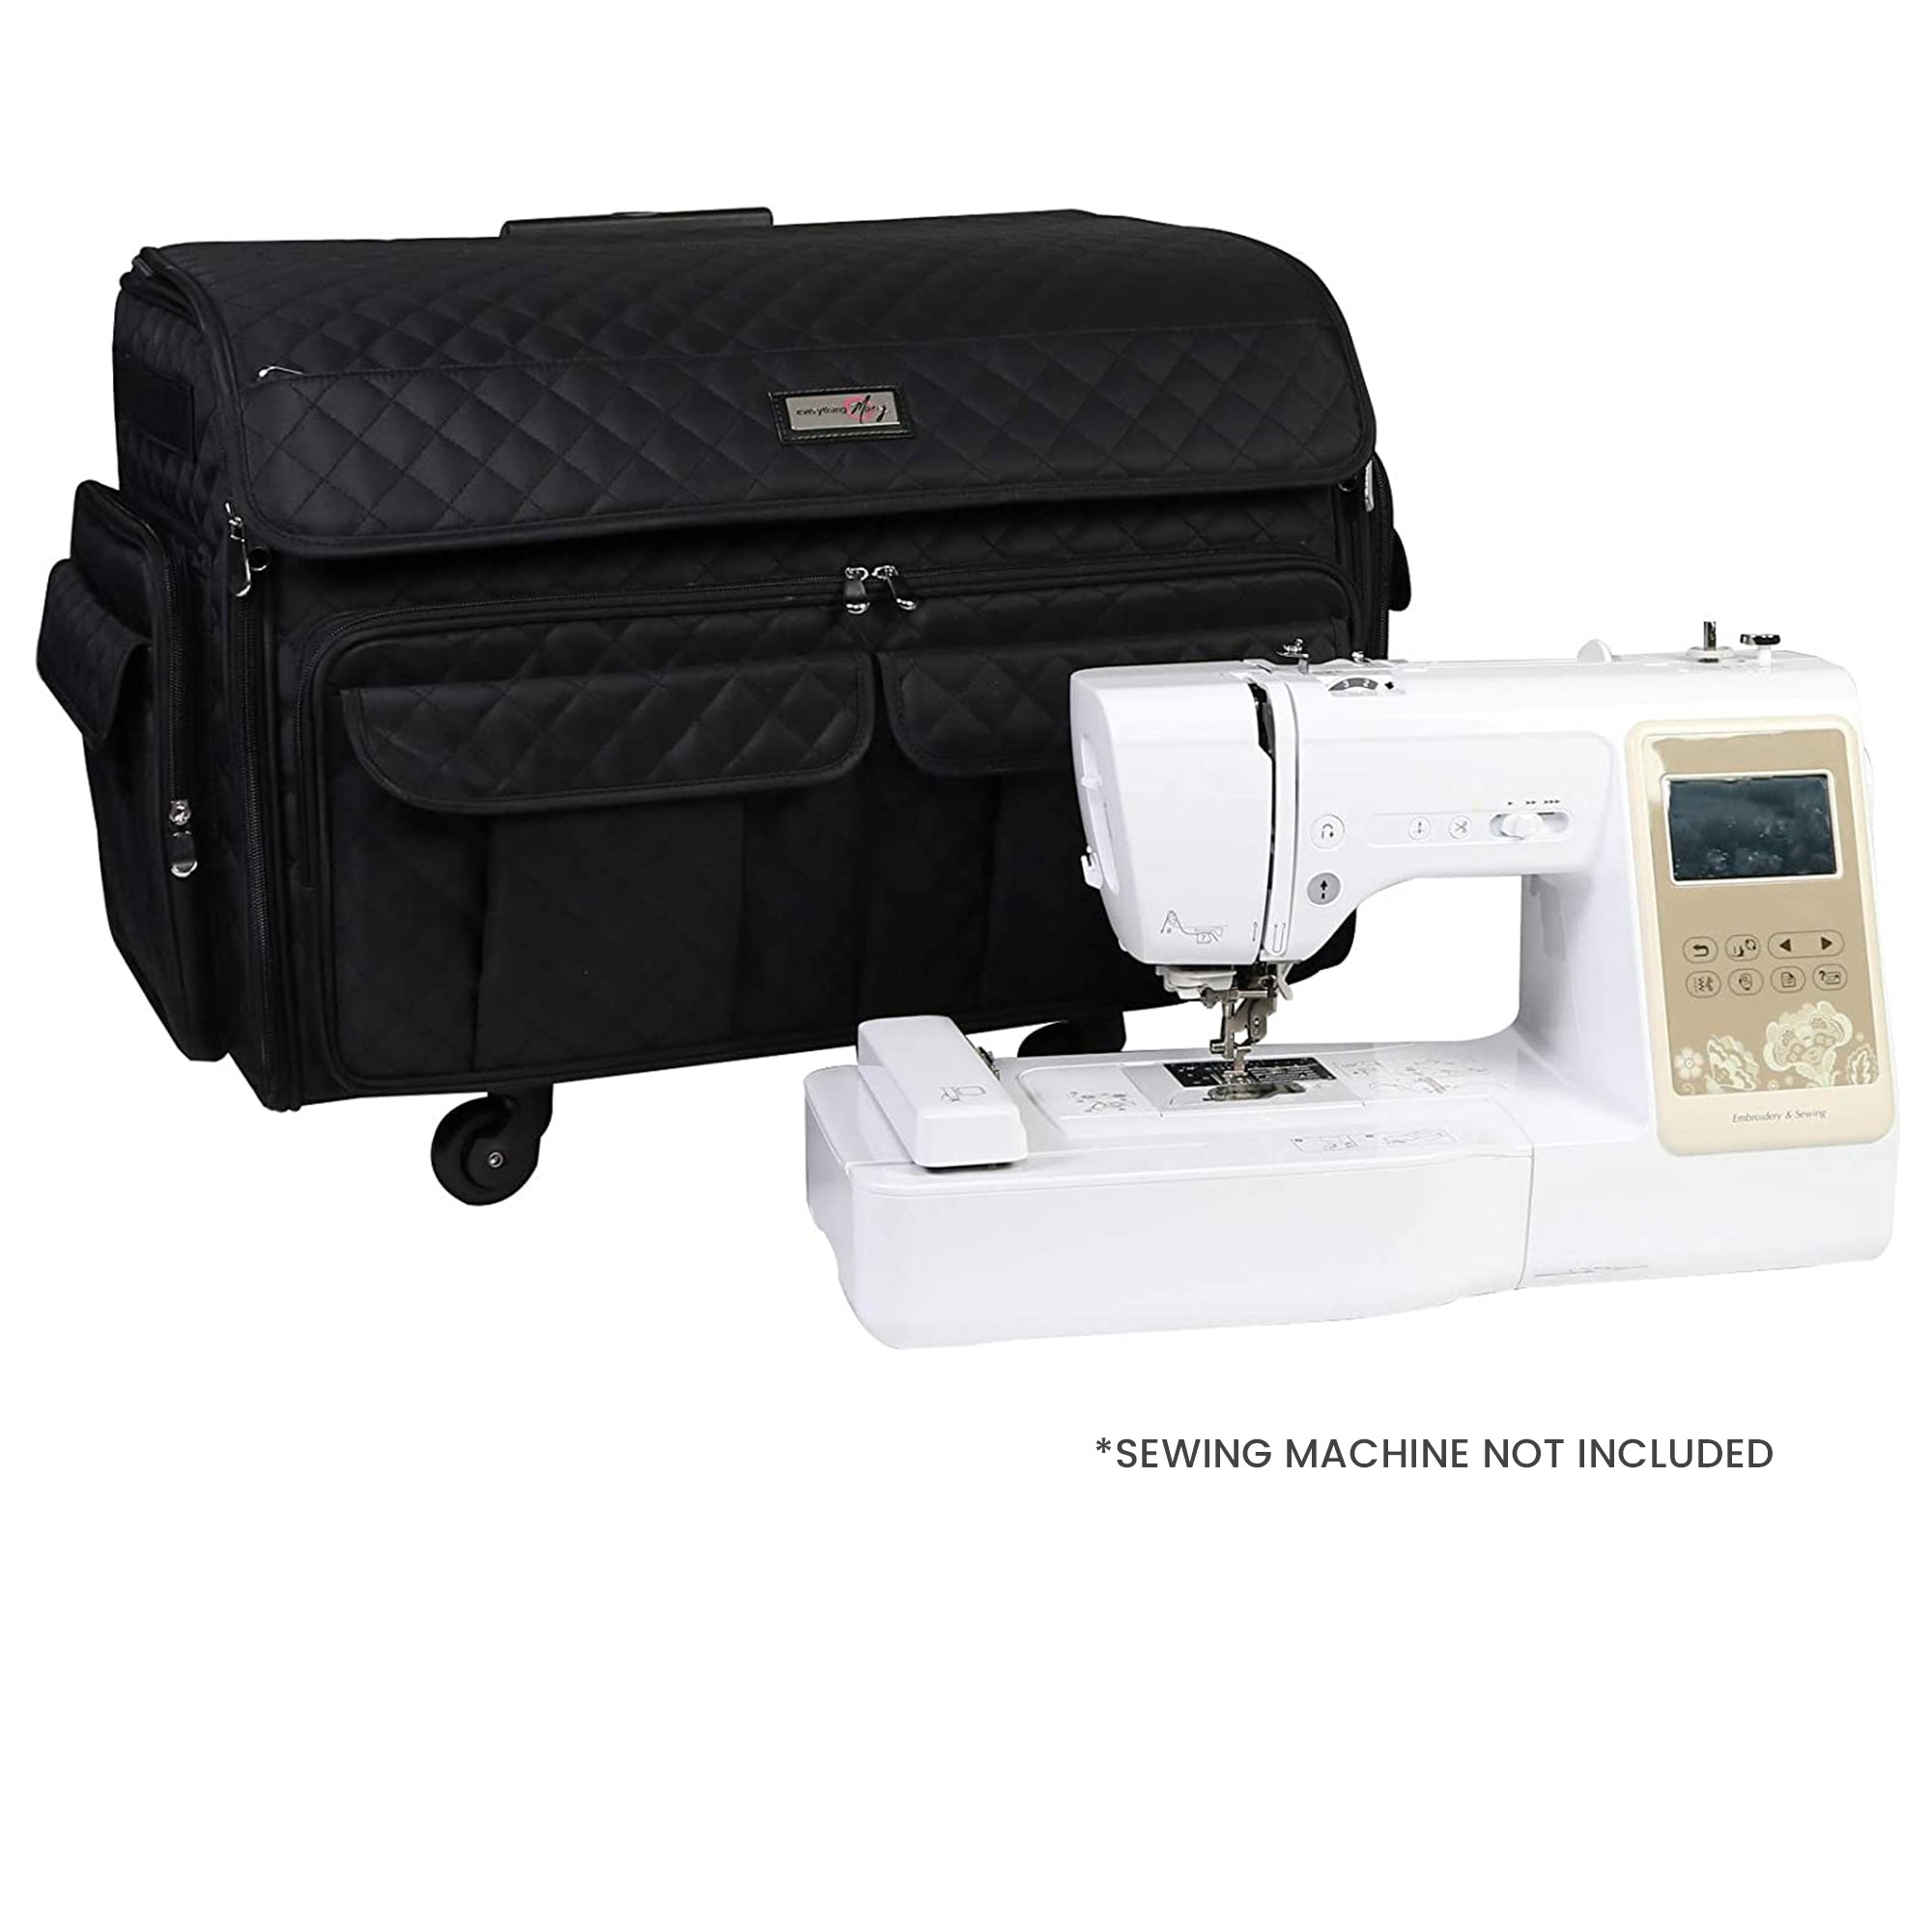 Teamoy Sewing Machine Case with Top Wide Opening, Universal Sewing